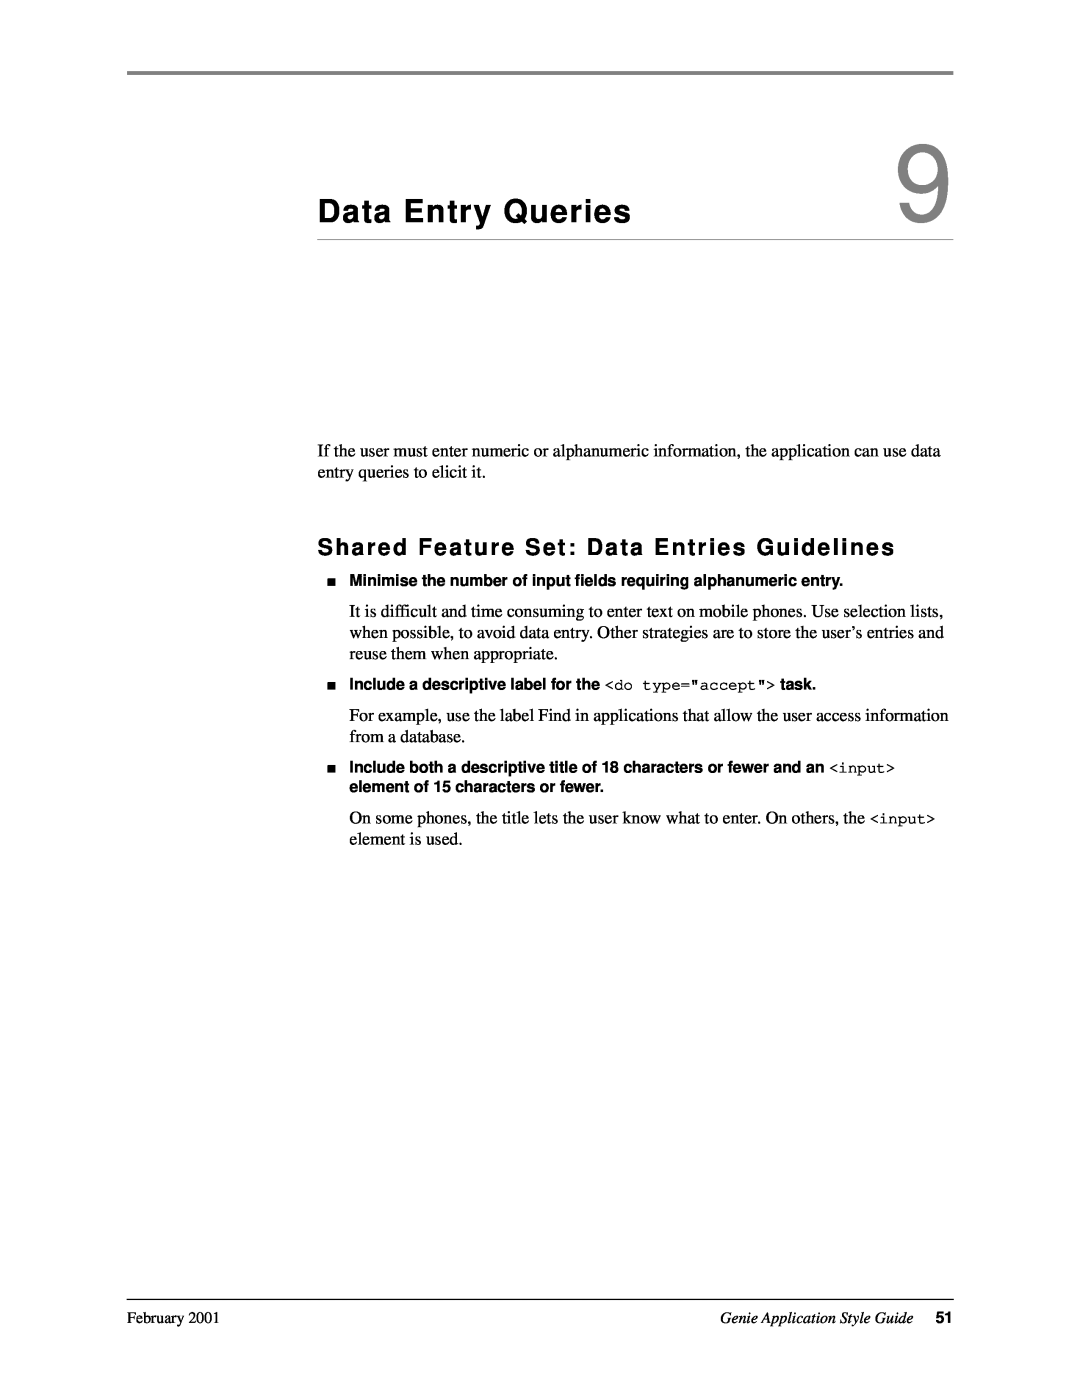 Genie 7110 manual Data Entry Queries, Shared Feature Set Data Entries Guidelines 